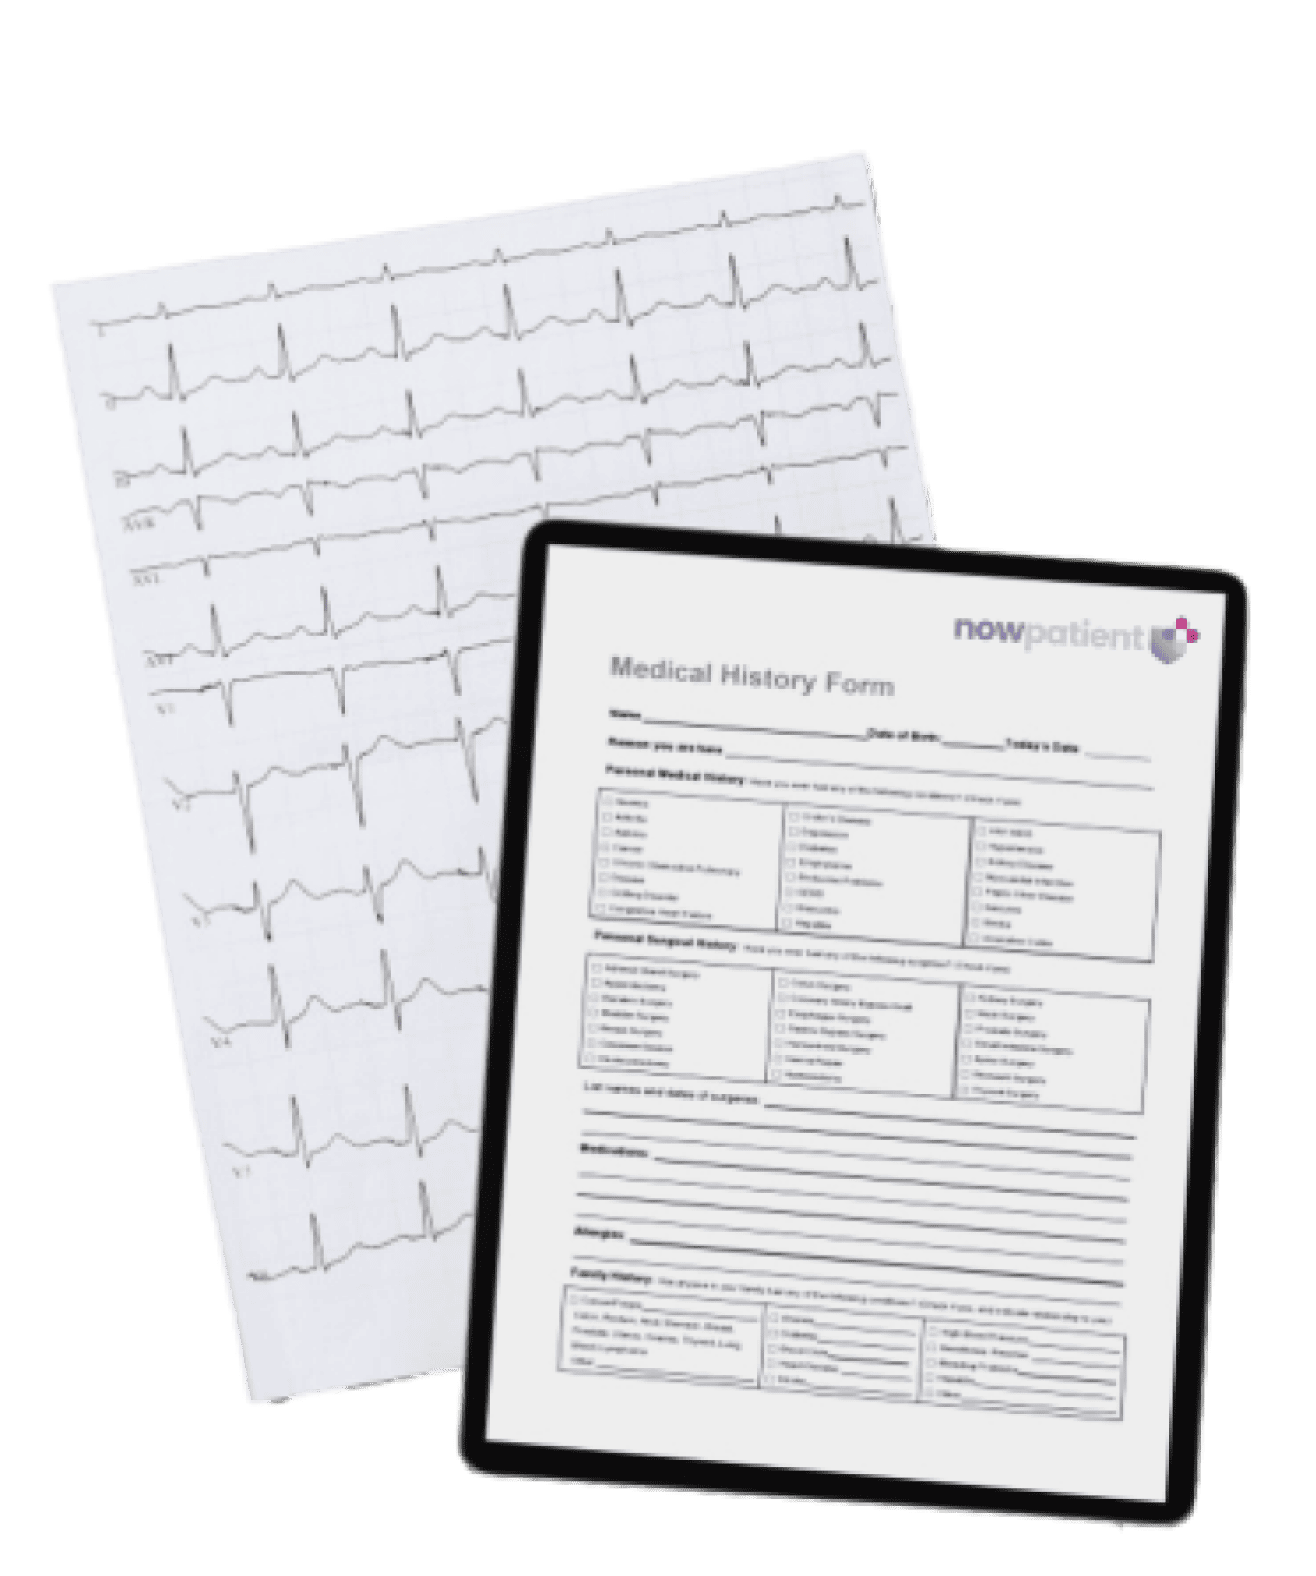 An ECG printout and a digital tablet displaying a medical history form from Now Patient.